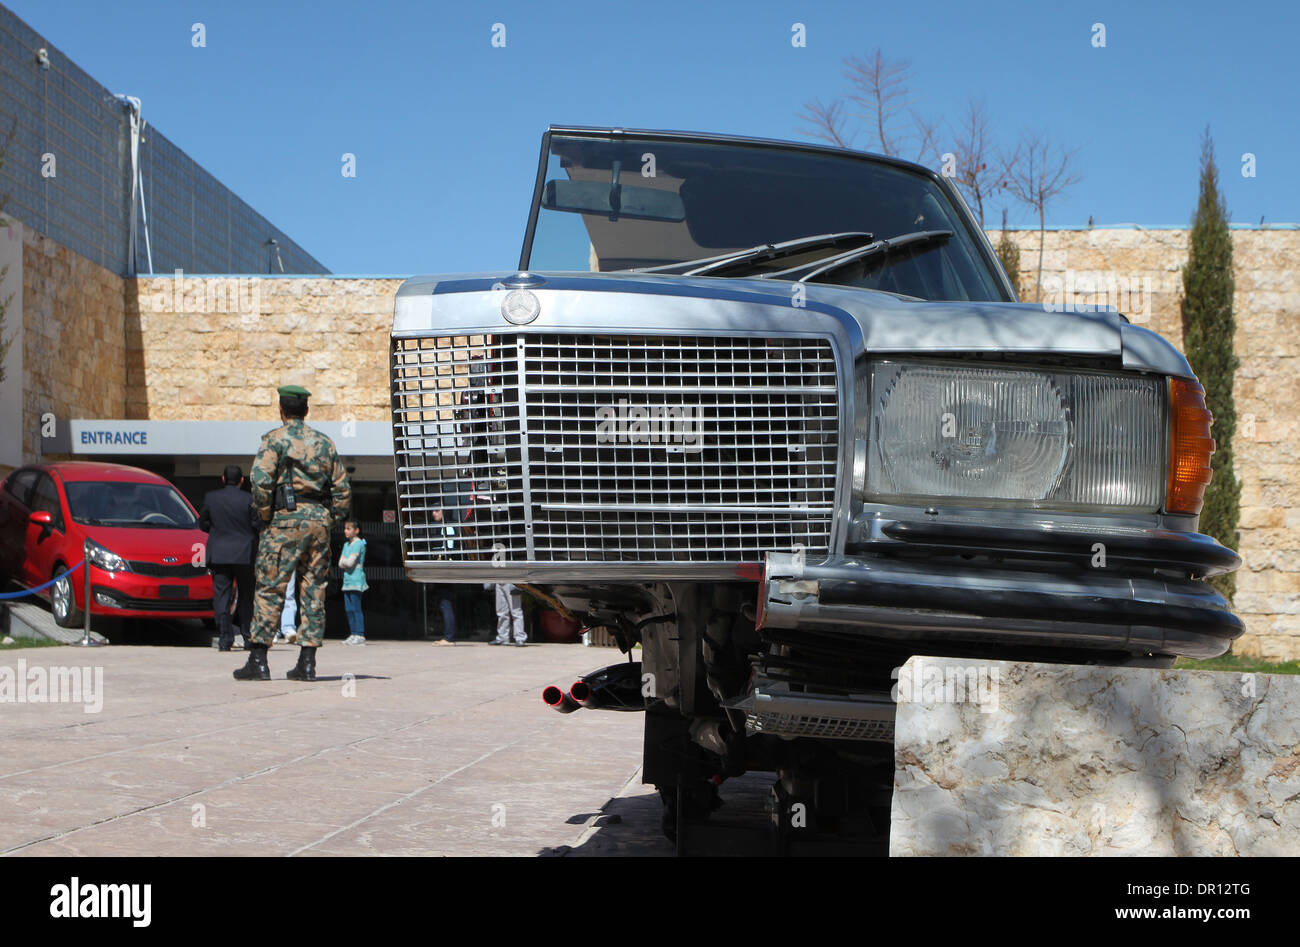 An old Mercedes-Benz exhibited in the entrance area of the Royal Automobile Museum. Al Hussein National Park, Amman, Jordan. Stock Photo